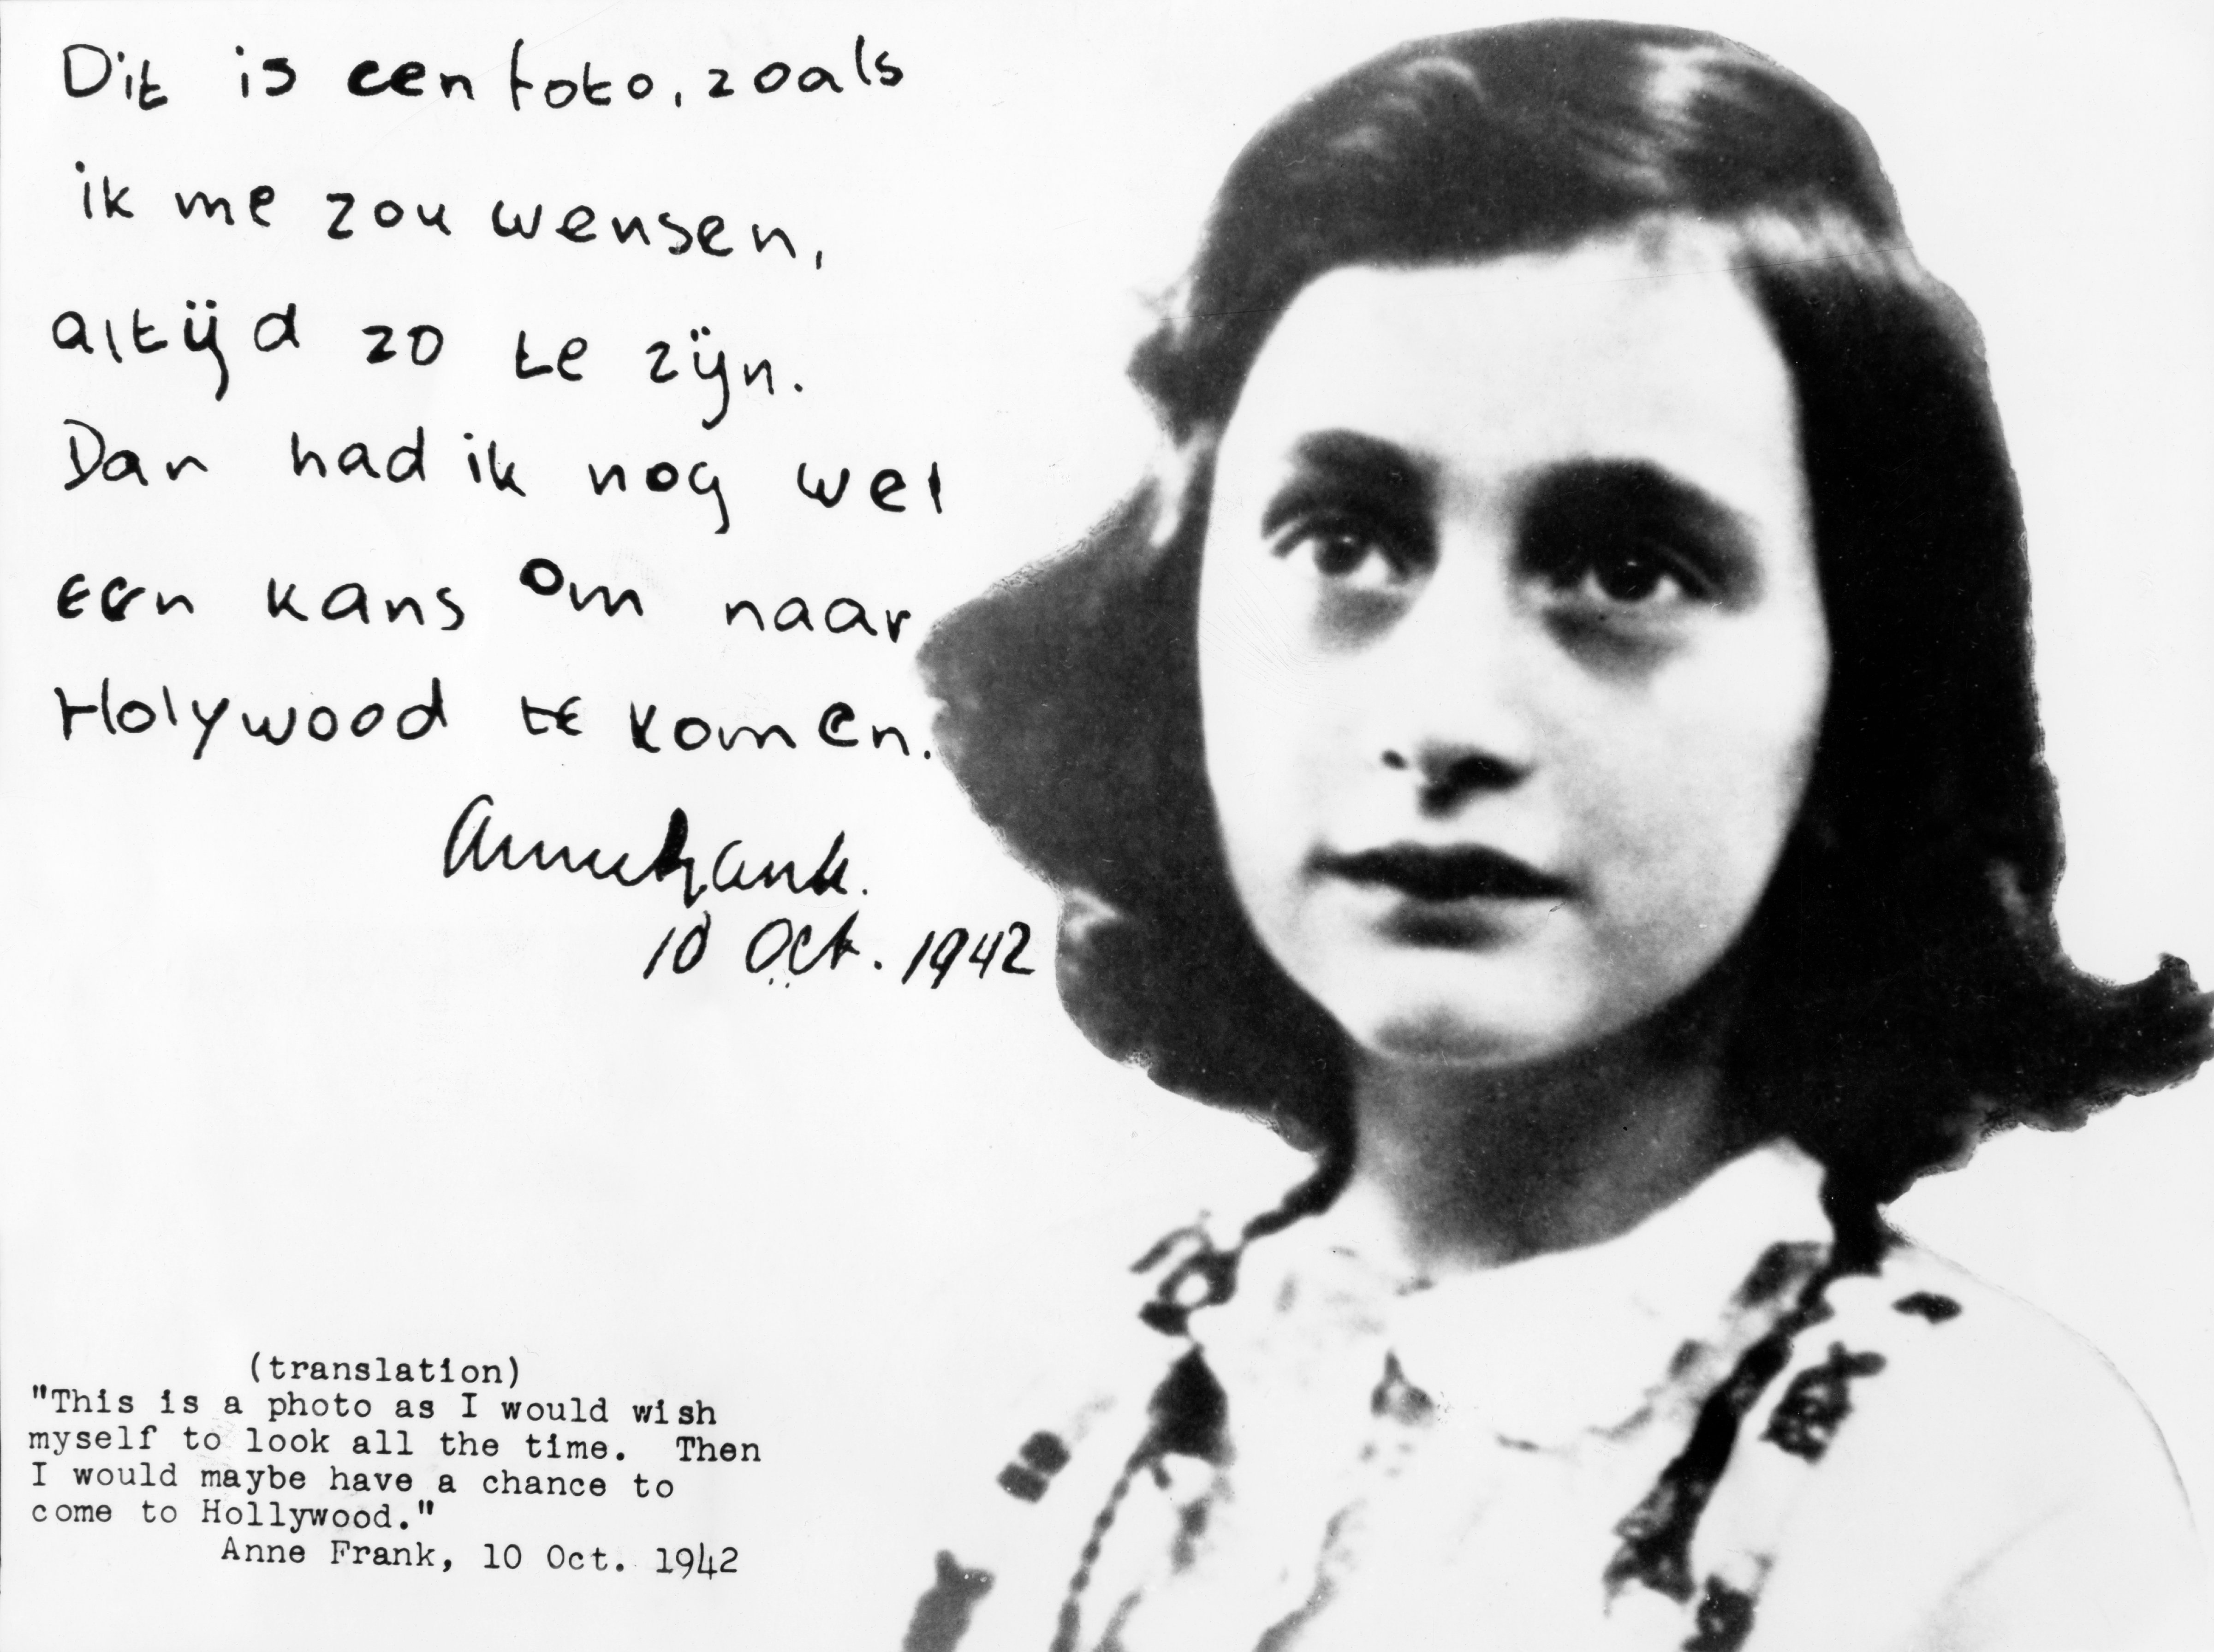 Anne Frank, German Jew who emigrated with her family to the Netherlands during the Nazi period. Separated from the rest of her family, she and her sister died of typhoid fever in the concentration camp Bergen-Belsen - Portrait with hadwritten comme